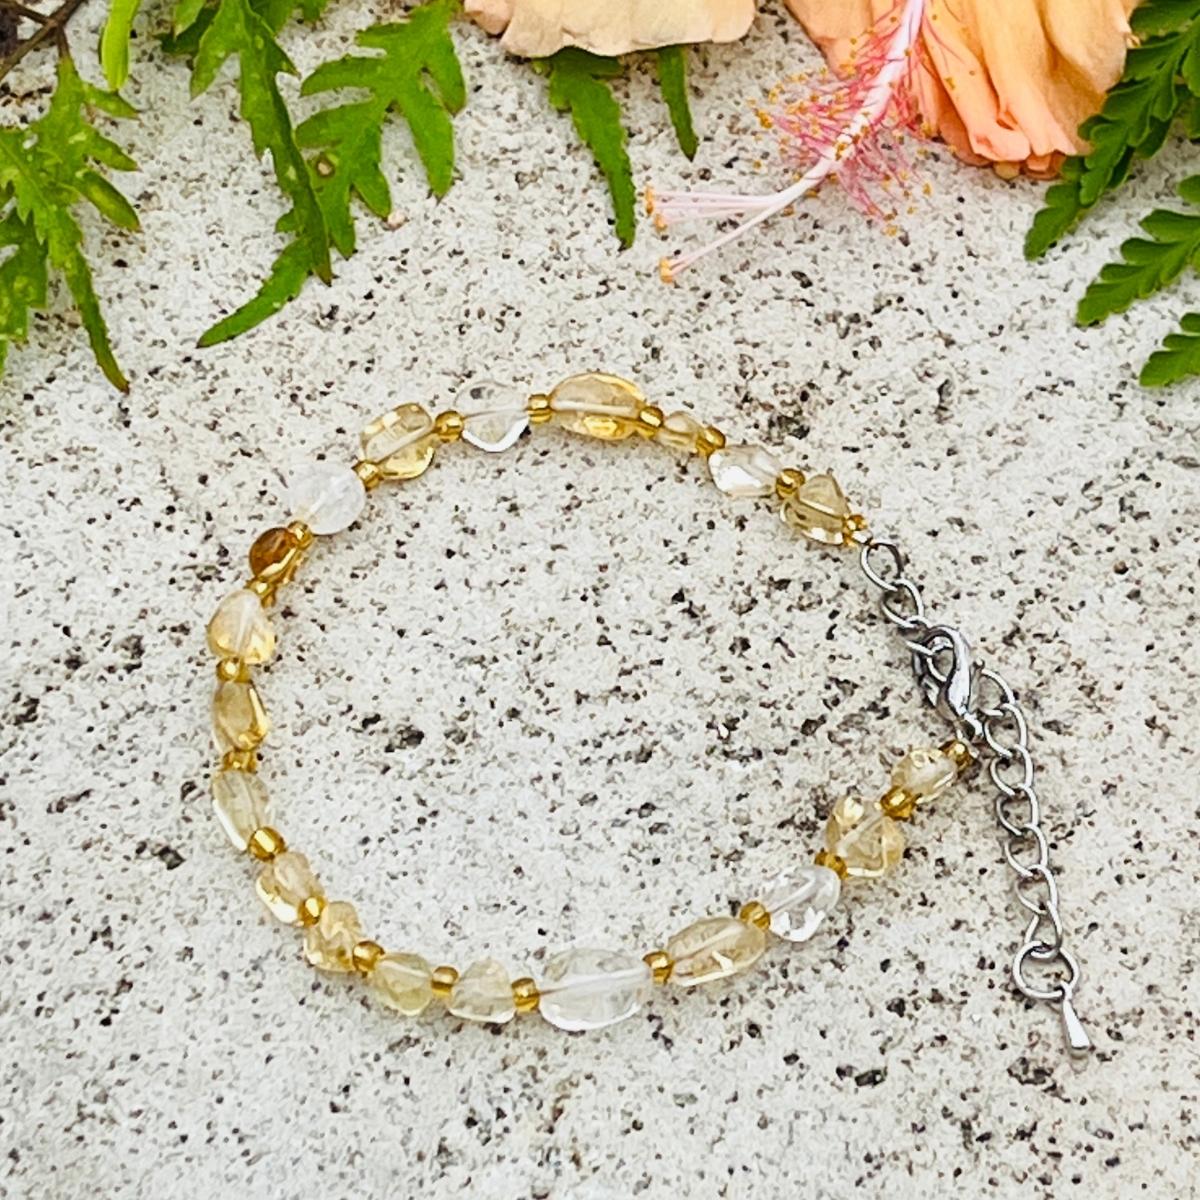 Citrine Bracelet to Bring Optimism into Your Life - Best Healing Crystal Bracelet for Optimism. Are you looking for crystals for optimism, crystals to help live happy? As a healing gemstone, citrine brings happiness, joy and optimism into your life. 